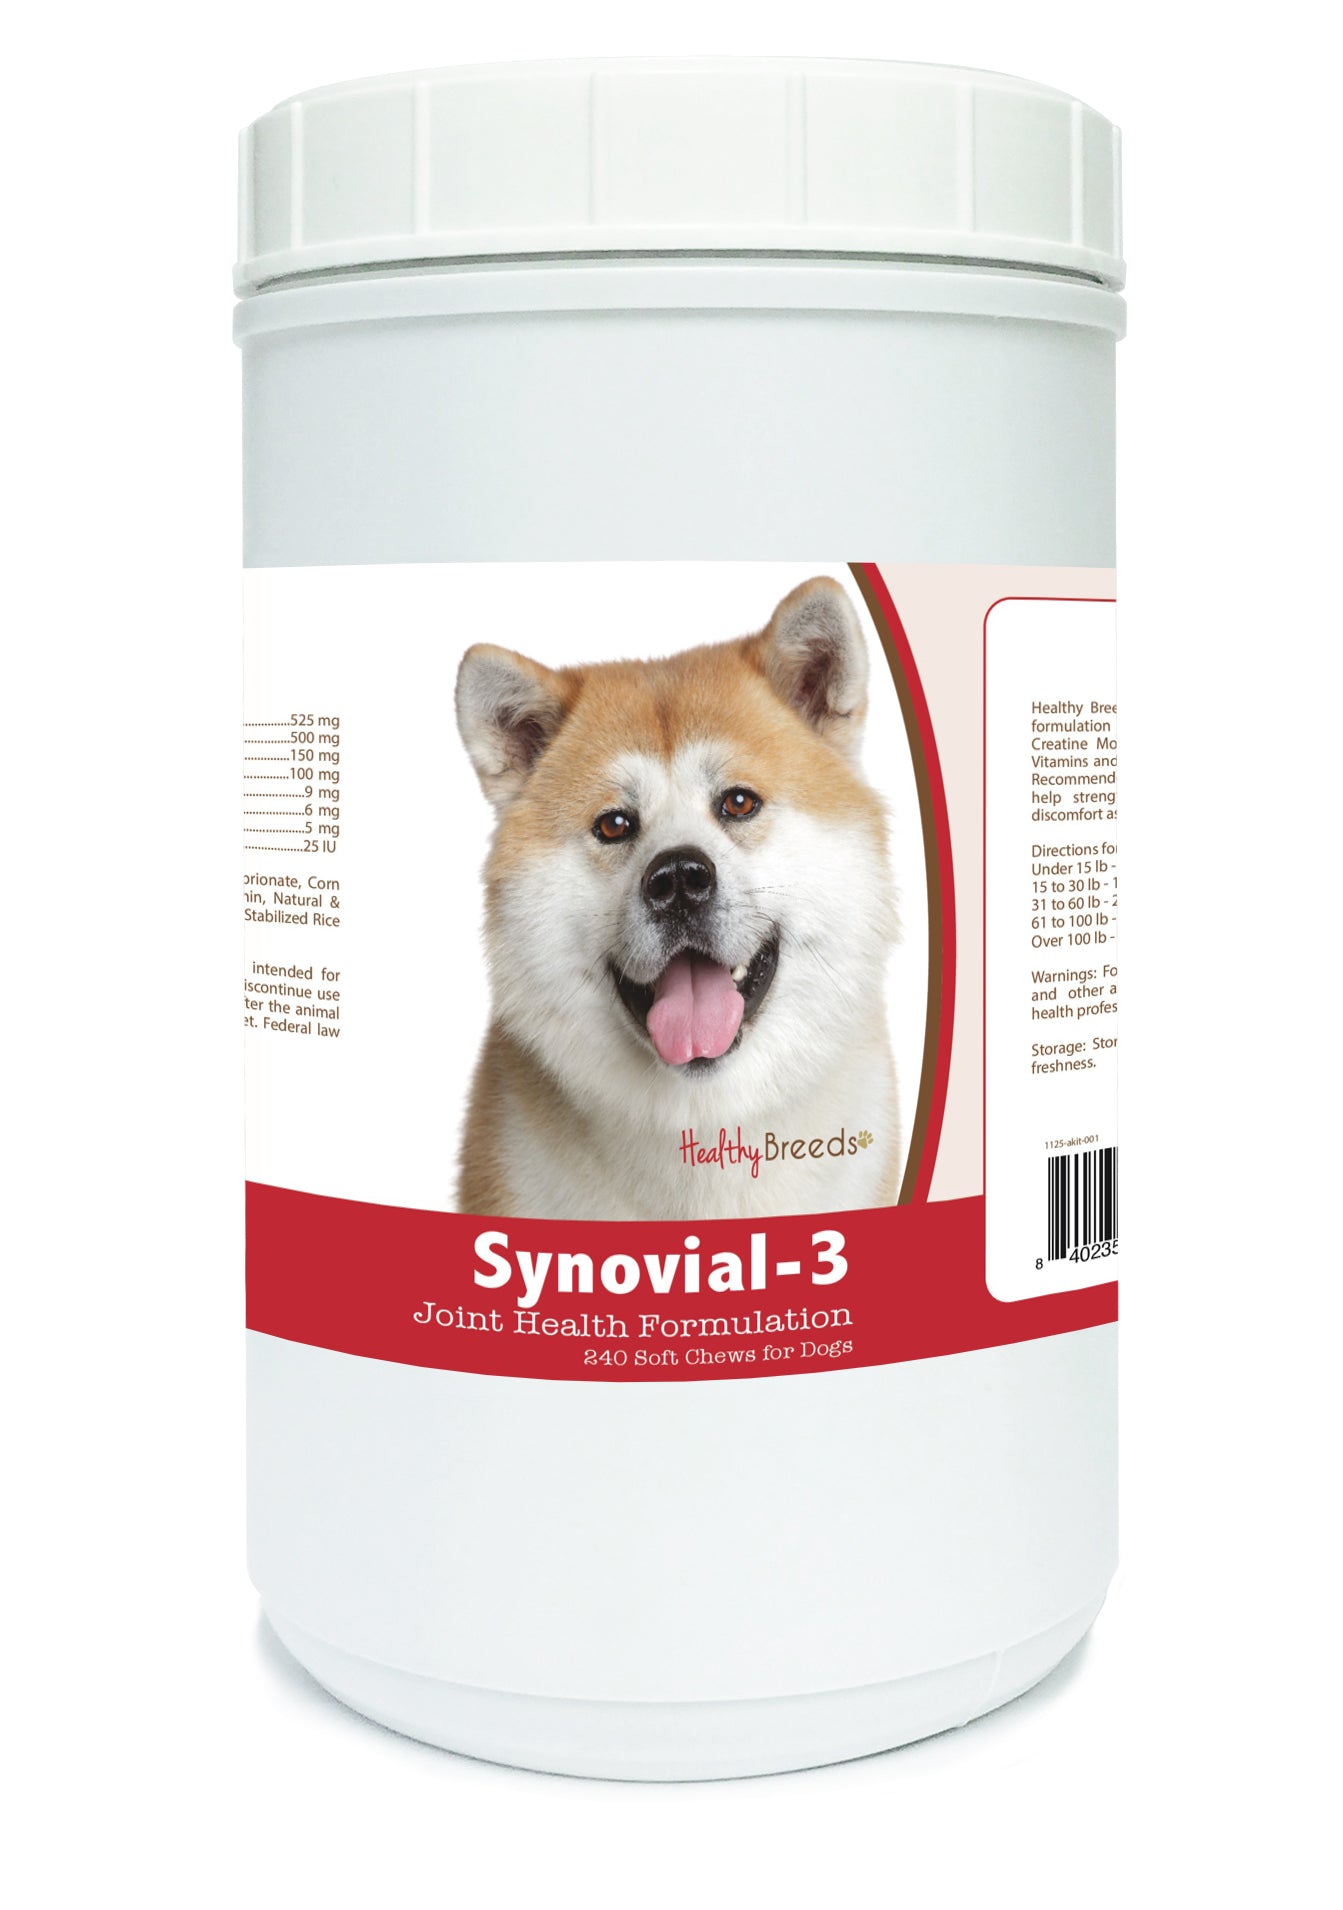 Akita Synovial-3 Joint Health Formulation Soft Chews 240 Count